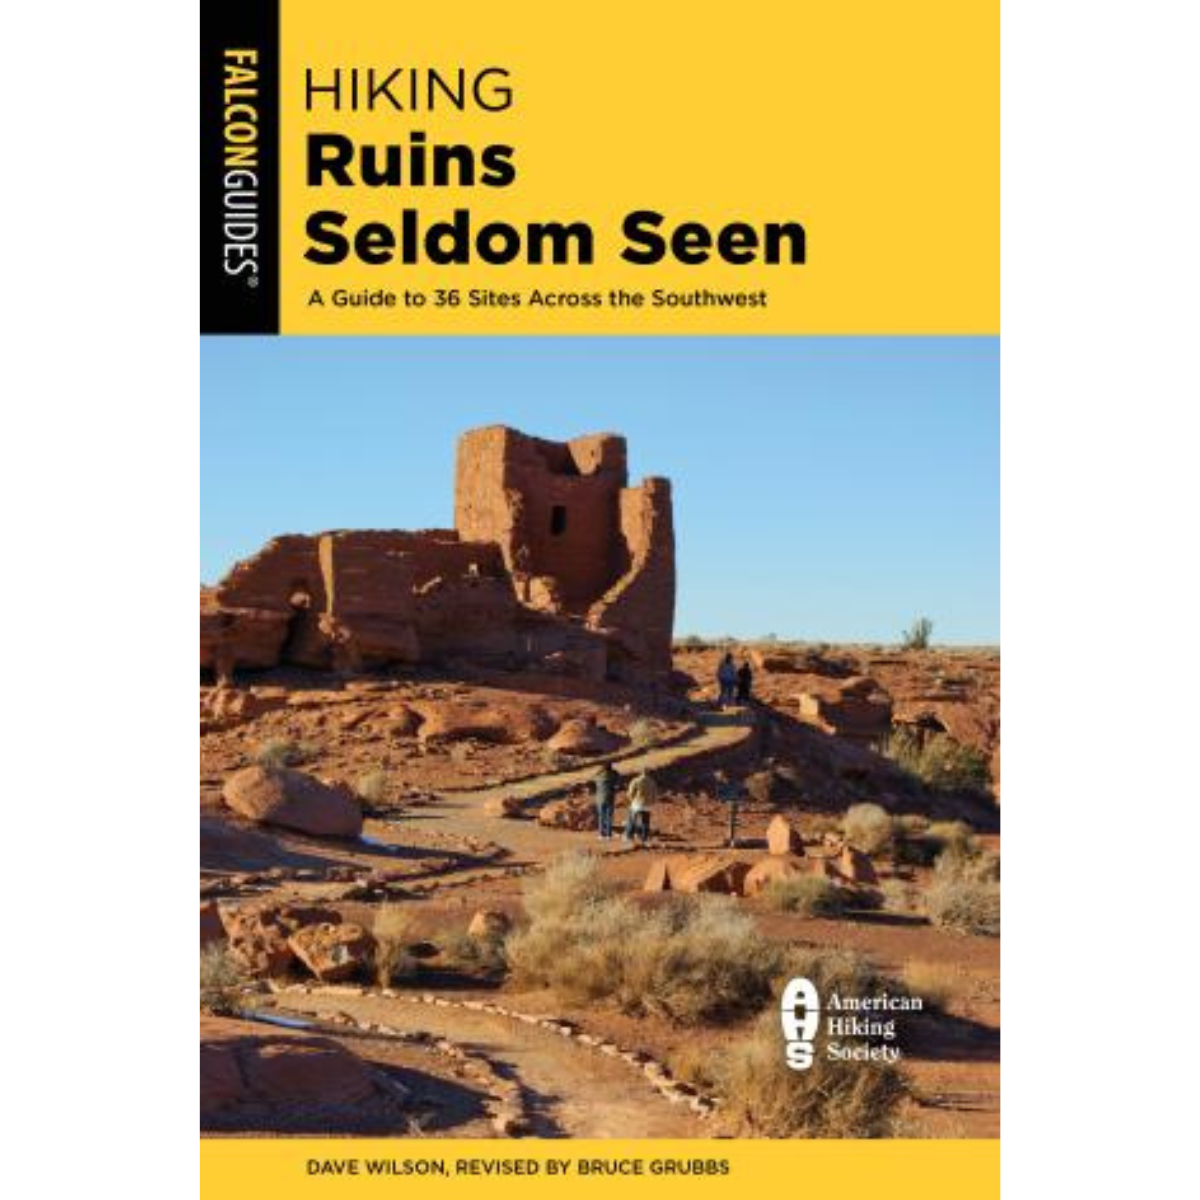 Hiking Ruins Seldom Seen: A Guide To 36 Sites Across The Southwest